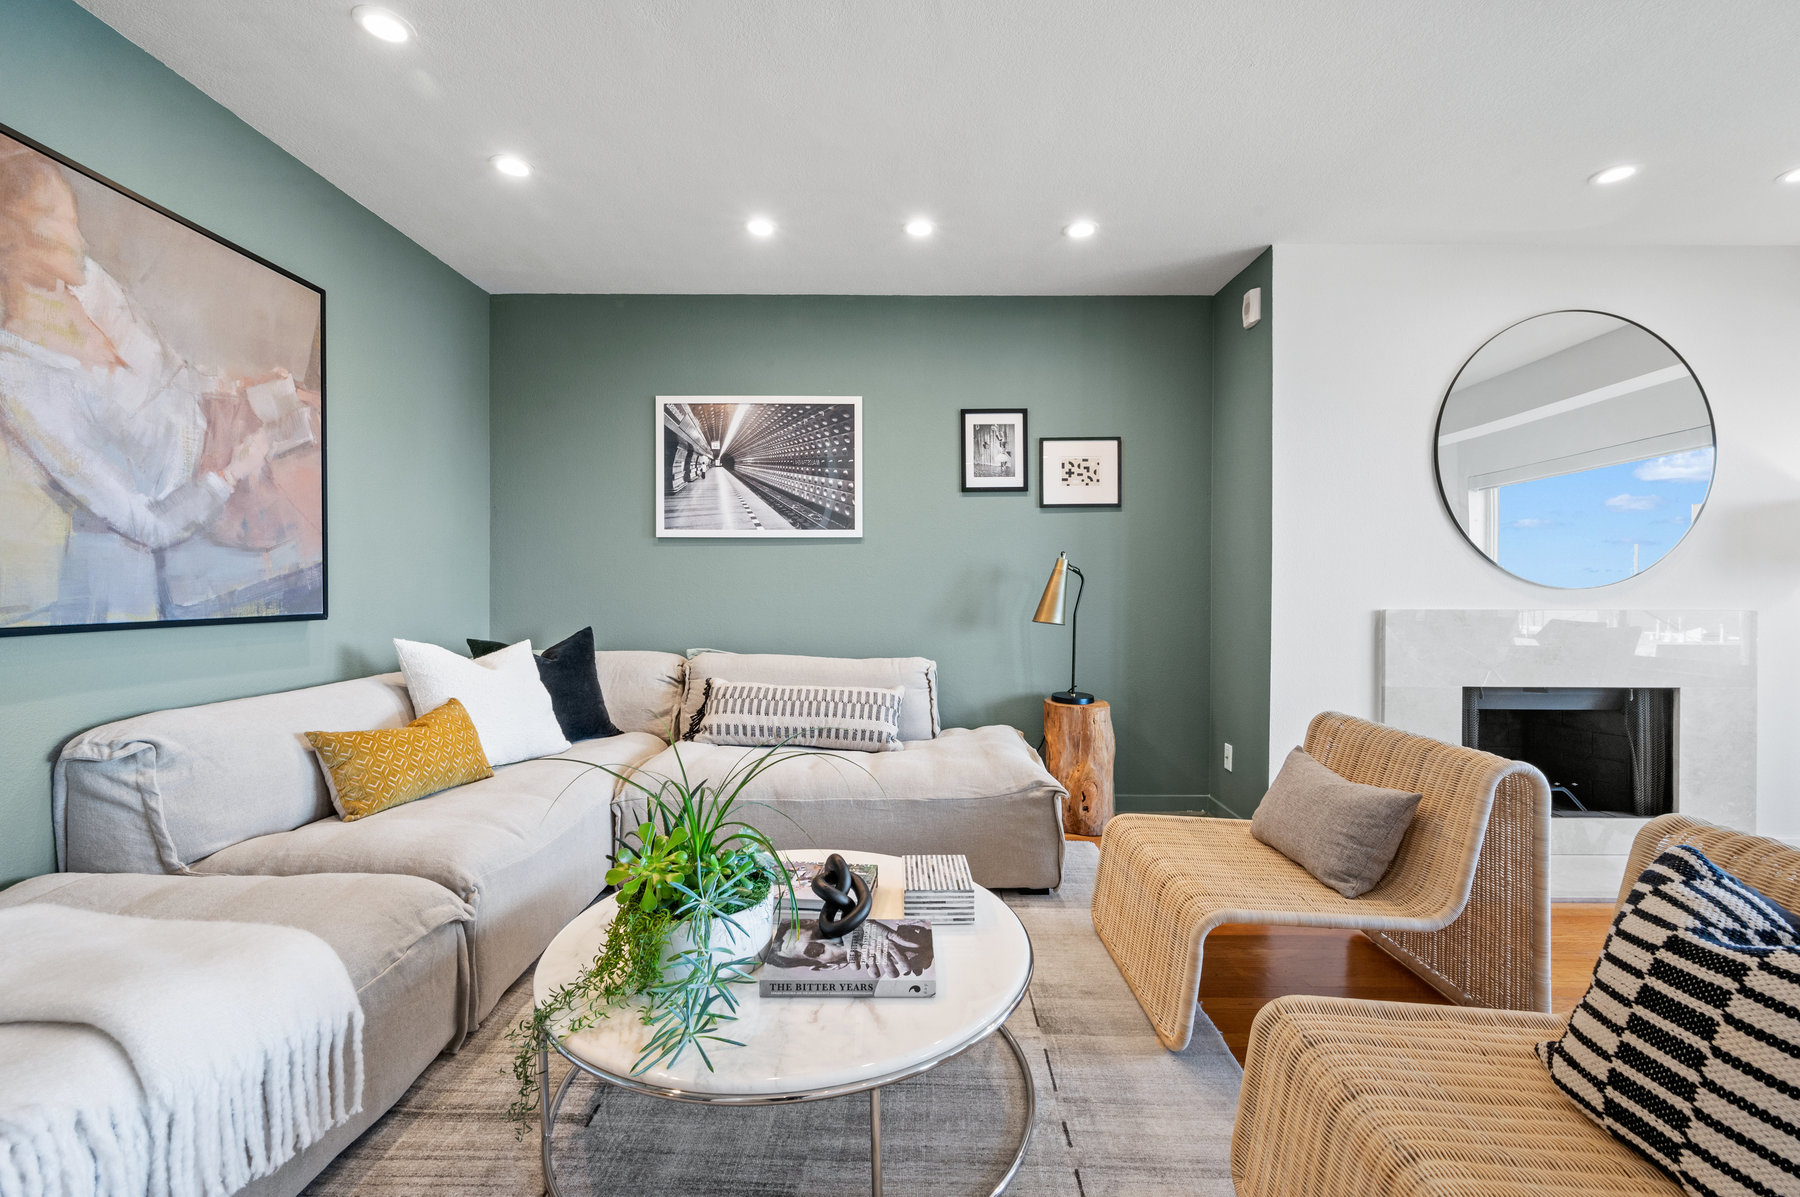 Property Photo: Living room area has pretty light green statement walls. L shaped couch with oval coffee table and two sitting chairs. 